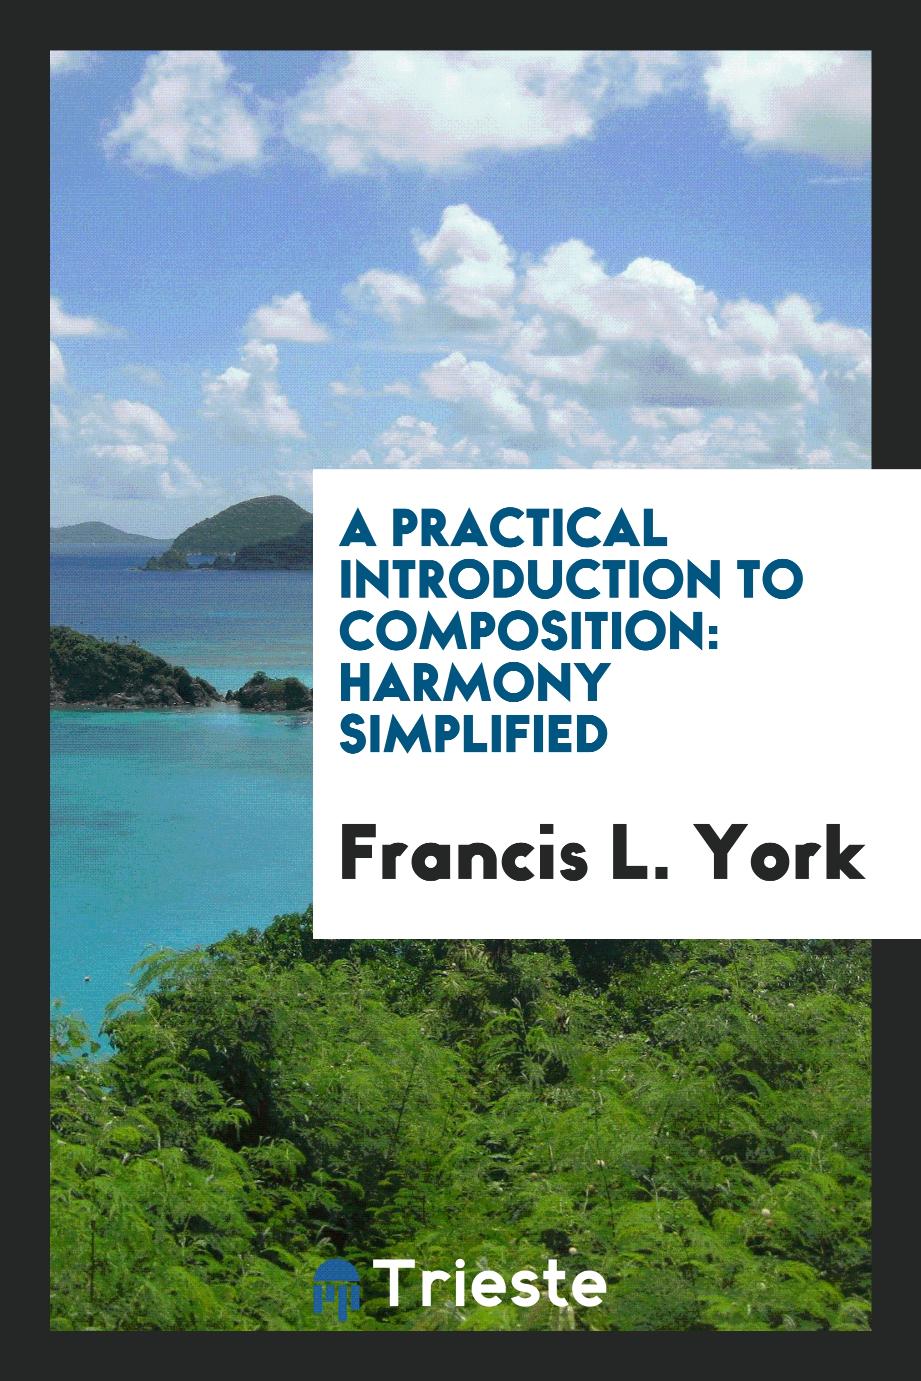 A Practical Introduction to Composition: Harmony Simplified